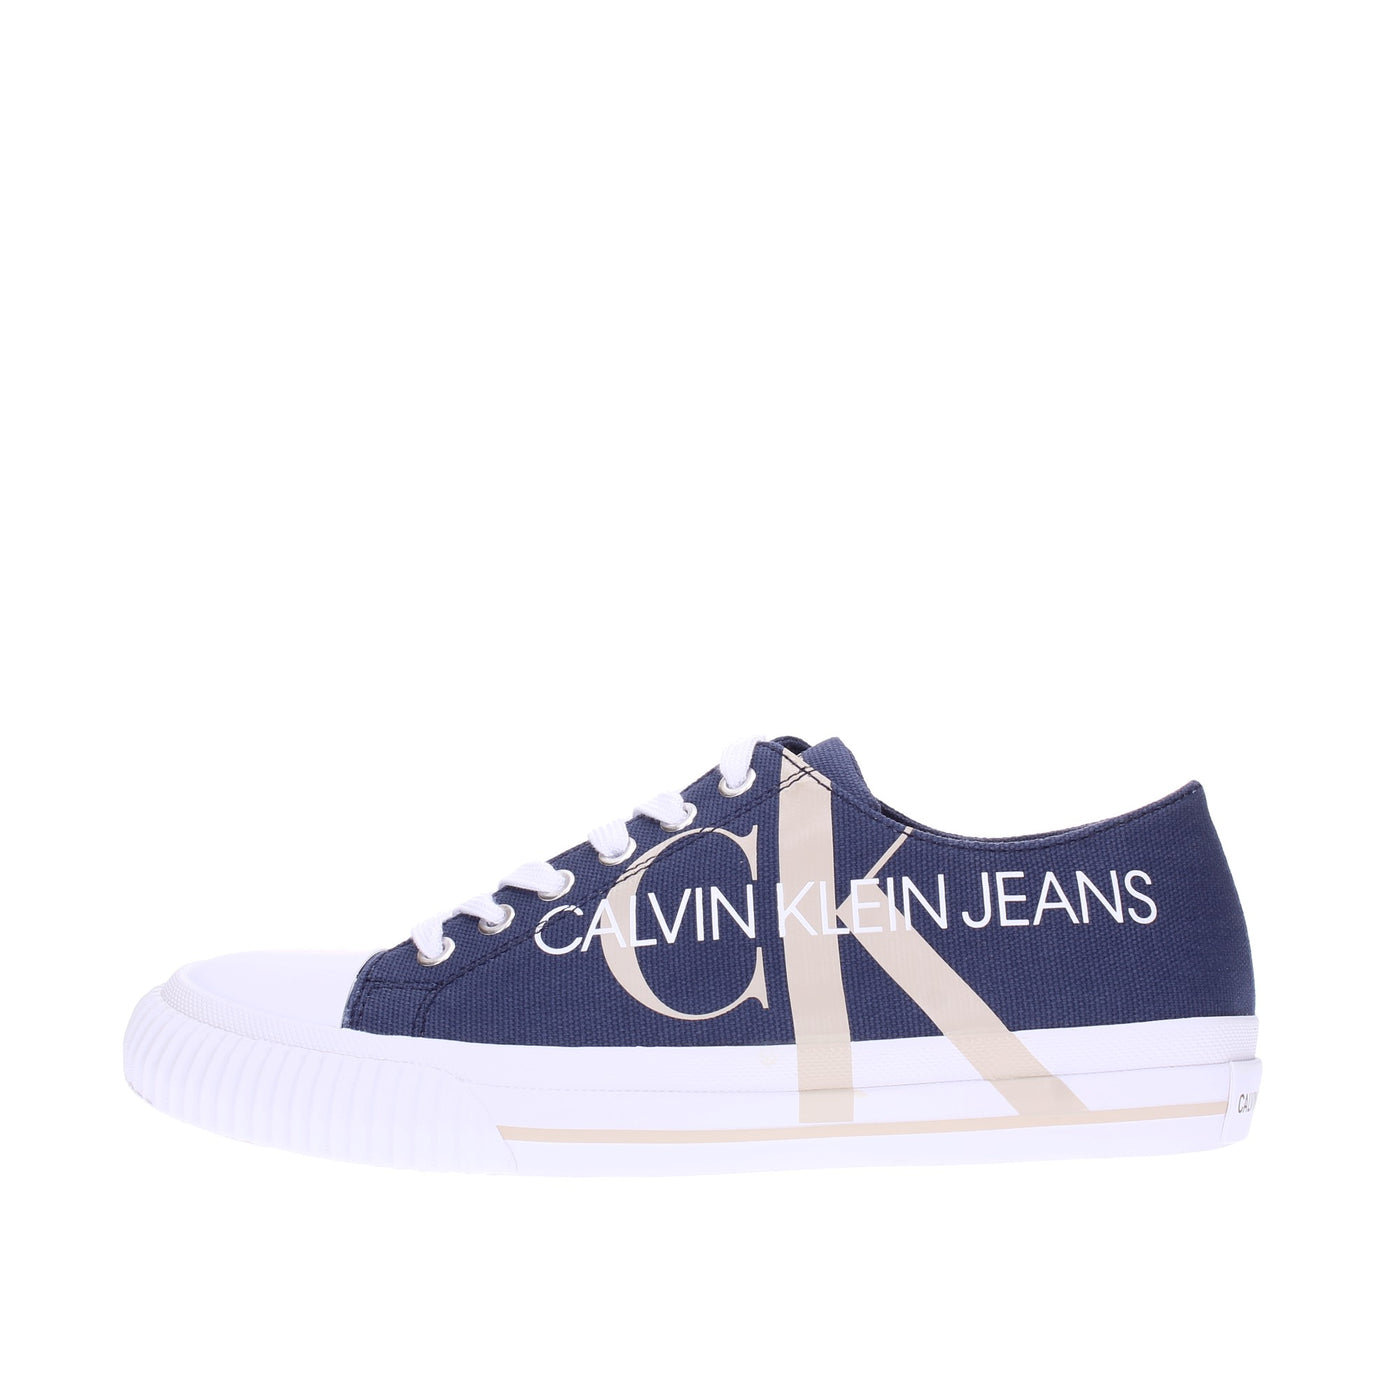 Calvin klein jeans Sneakers#colore_stone-navy